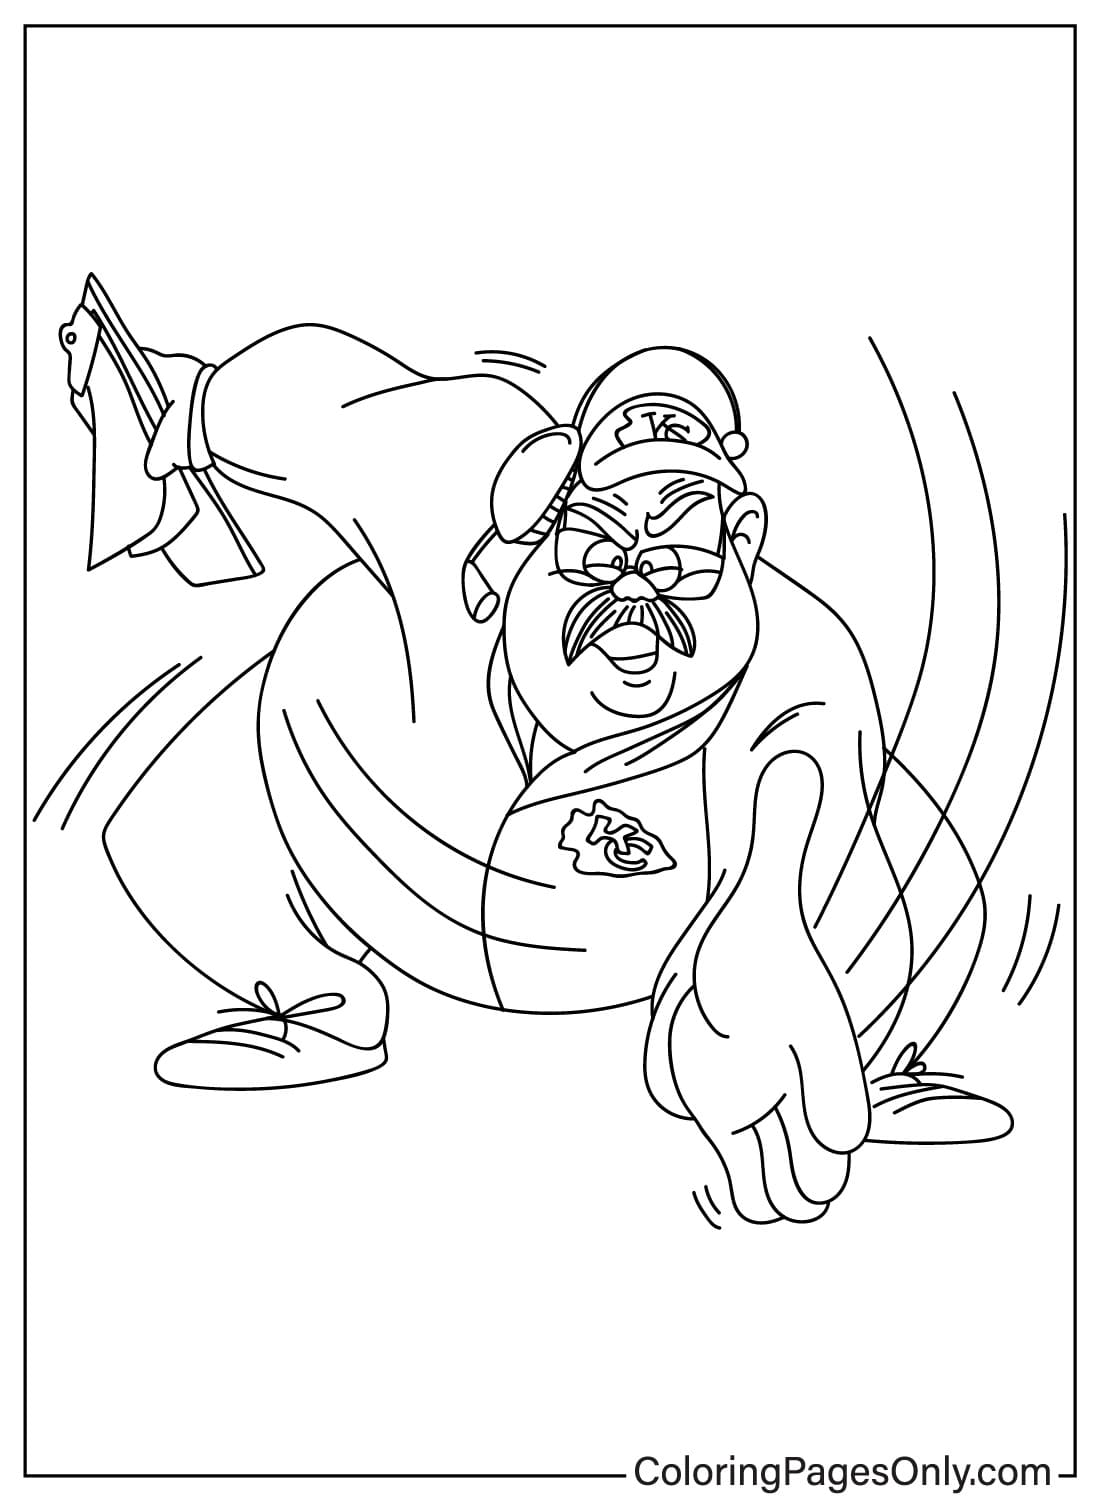 Andy Reid Coloring Page